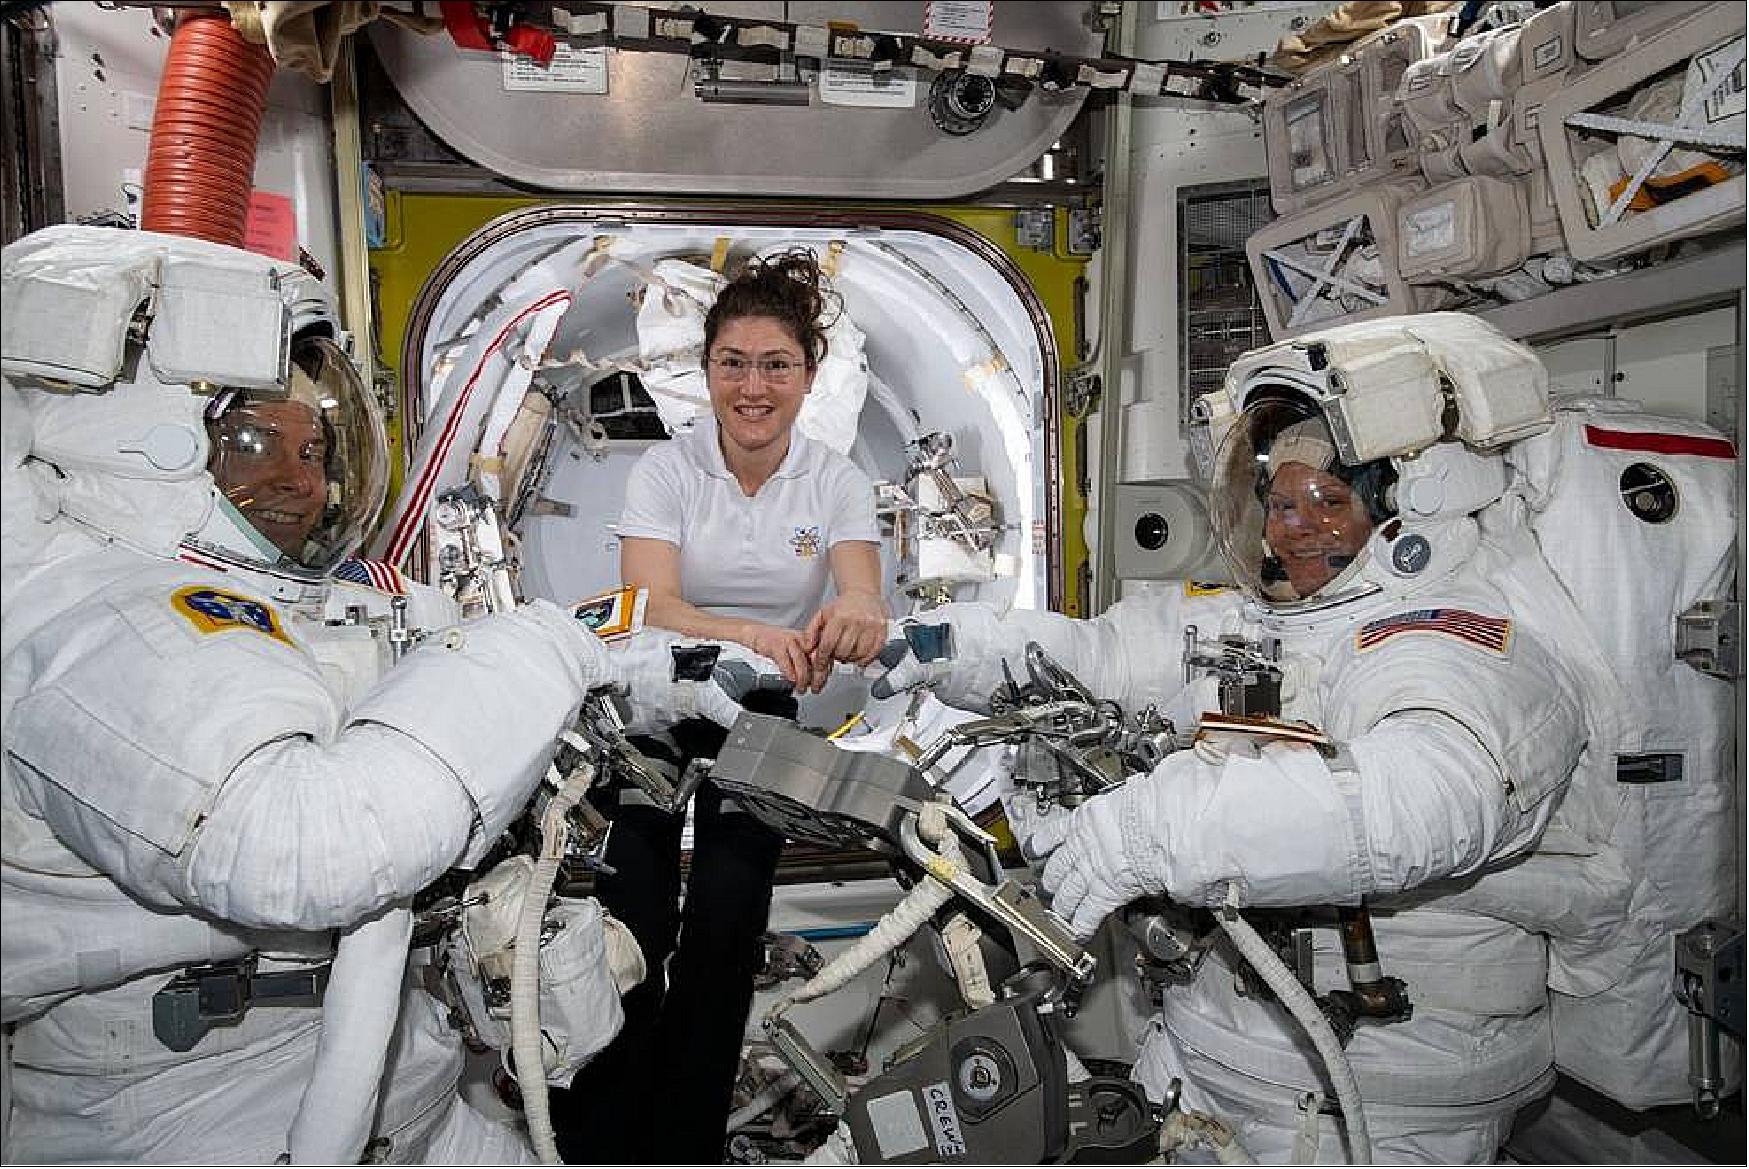 Figure 101: NASA astronaut Christina Koch, in the center of the image, assists fellow astronauts Nick Hague and Anne McClain in their spacesuits shortly before they begin the first spacewalk of their careers. Hague and McClain worked outside, in the vacuum of space, for six hours and 39 minutes on March 22, 2019, to upgrade the International Space Station's power storage capacity (image credit: NASA) 83)